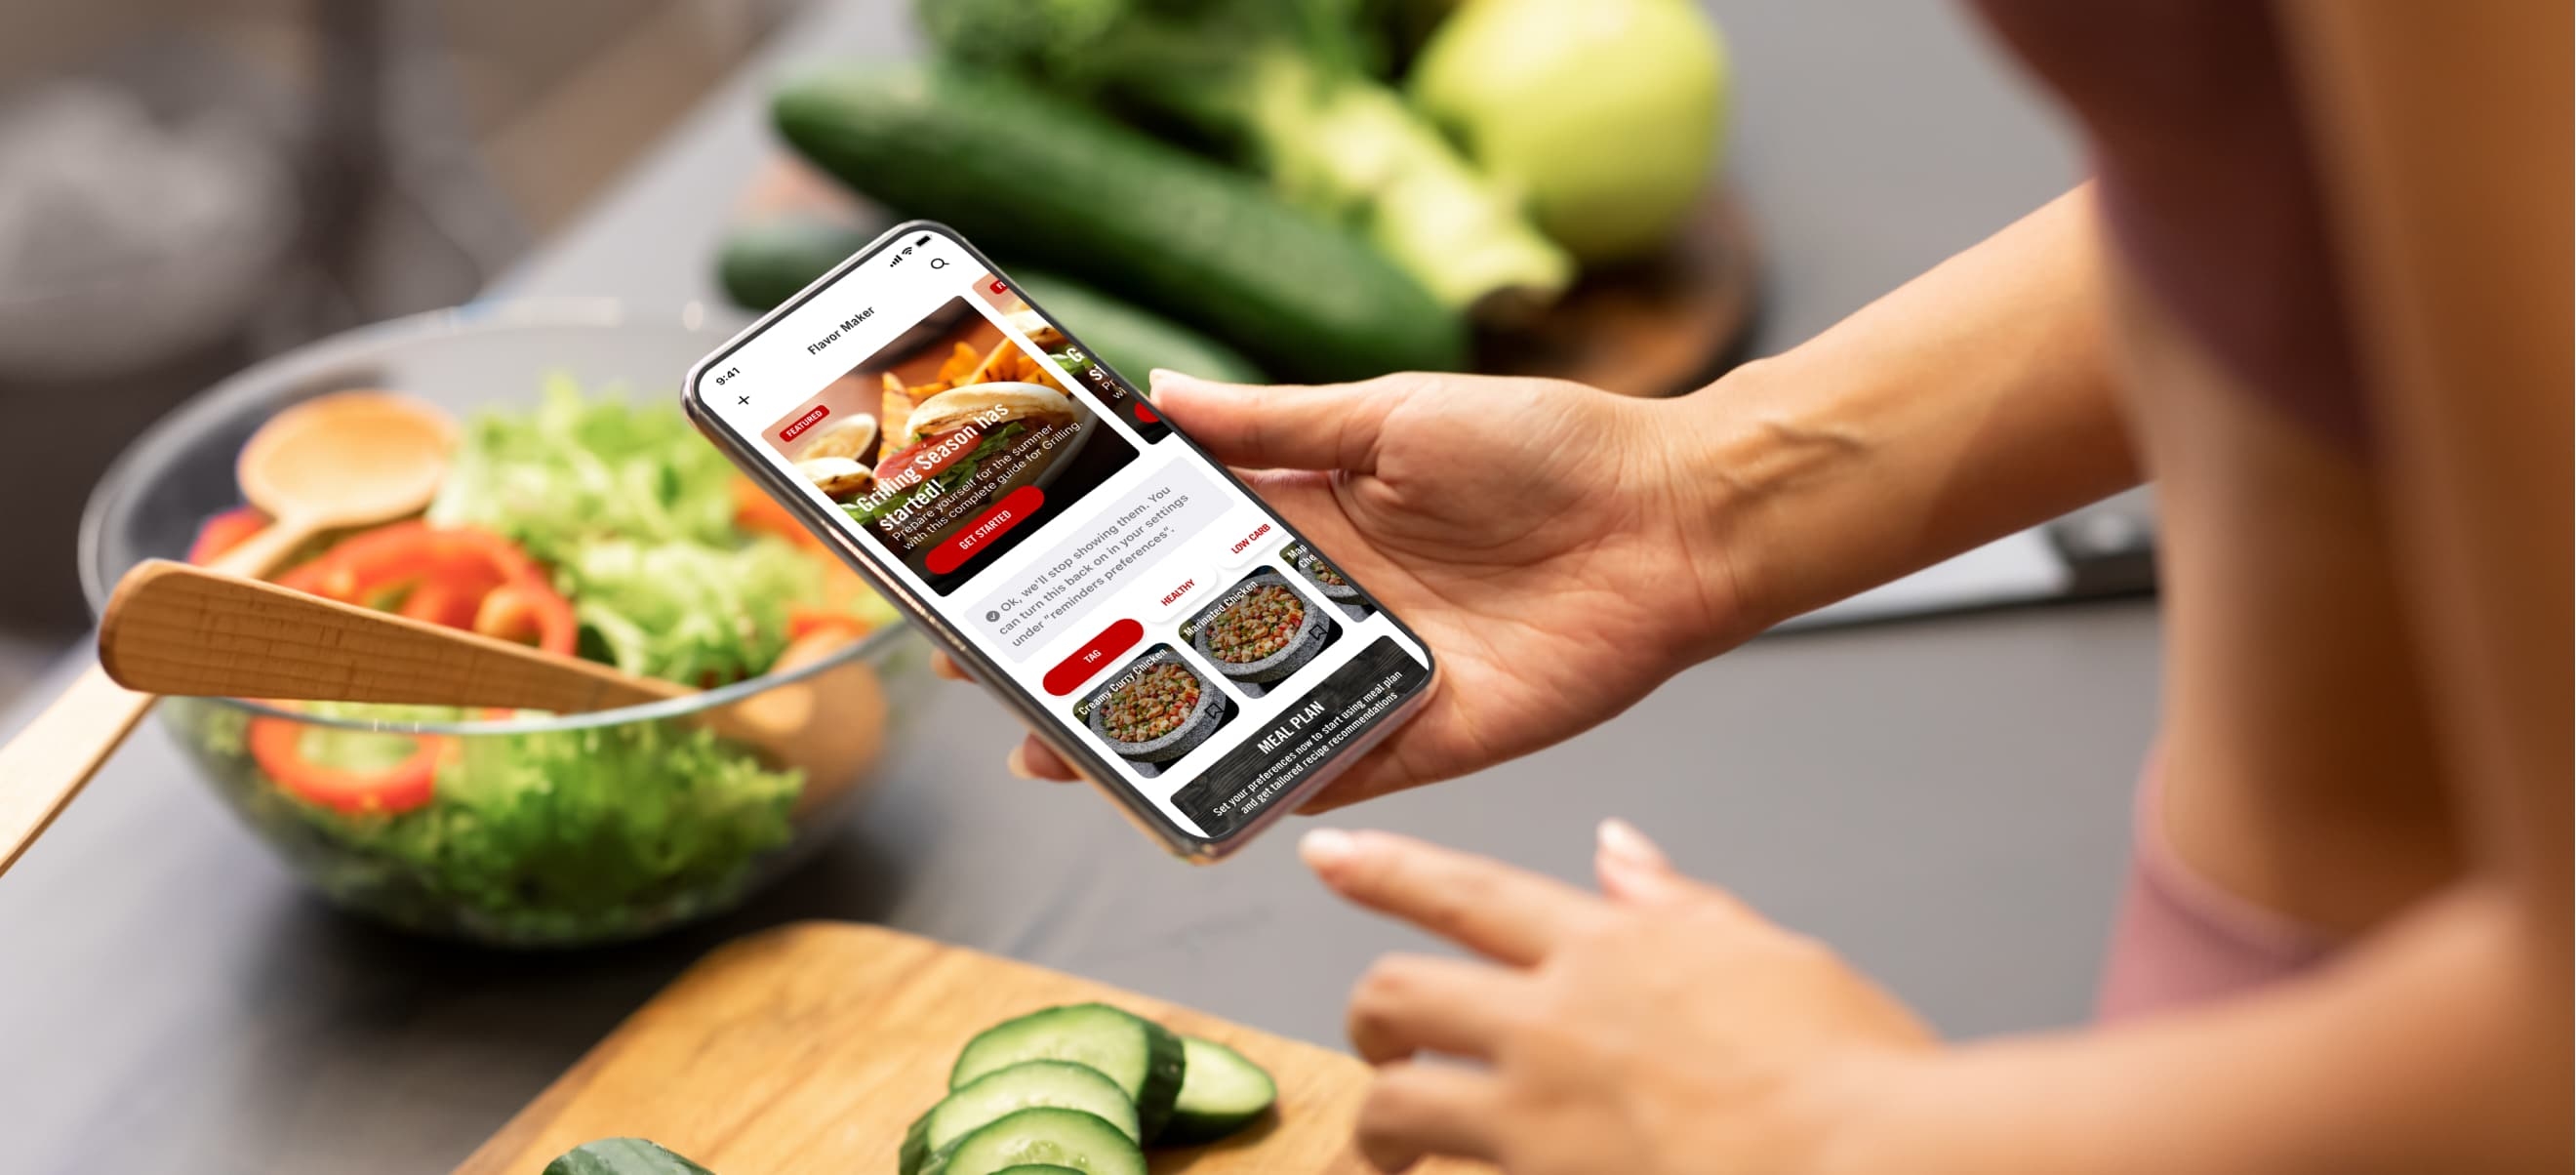 A person holds a smartphone displaying the McCormick app while preparing a fresh salad in a kitchen setting.